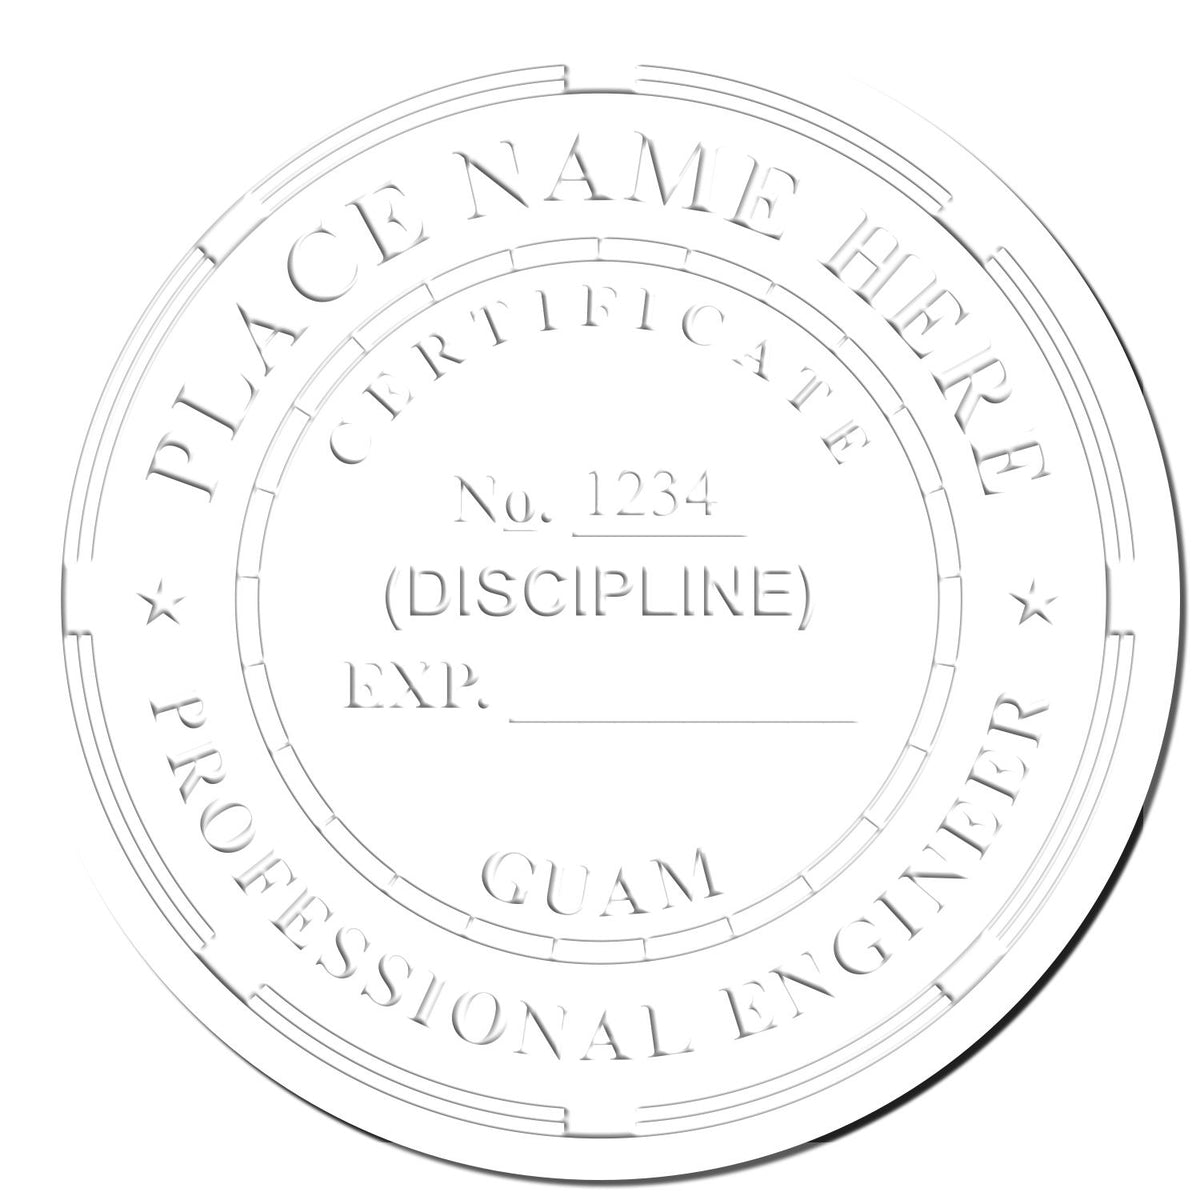 This paper is stamped with a sample imprint of the Gift Guam Engineer Seal, signifying its quality and reliability.